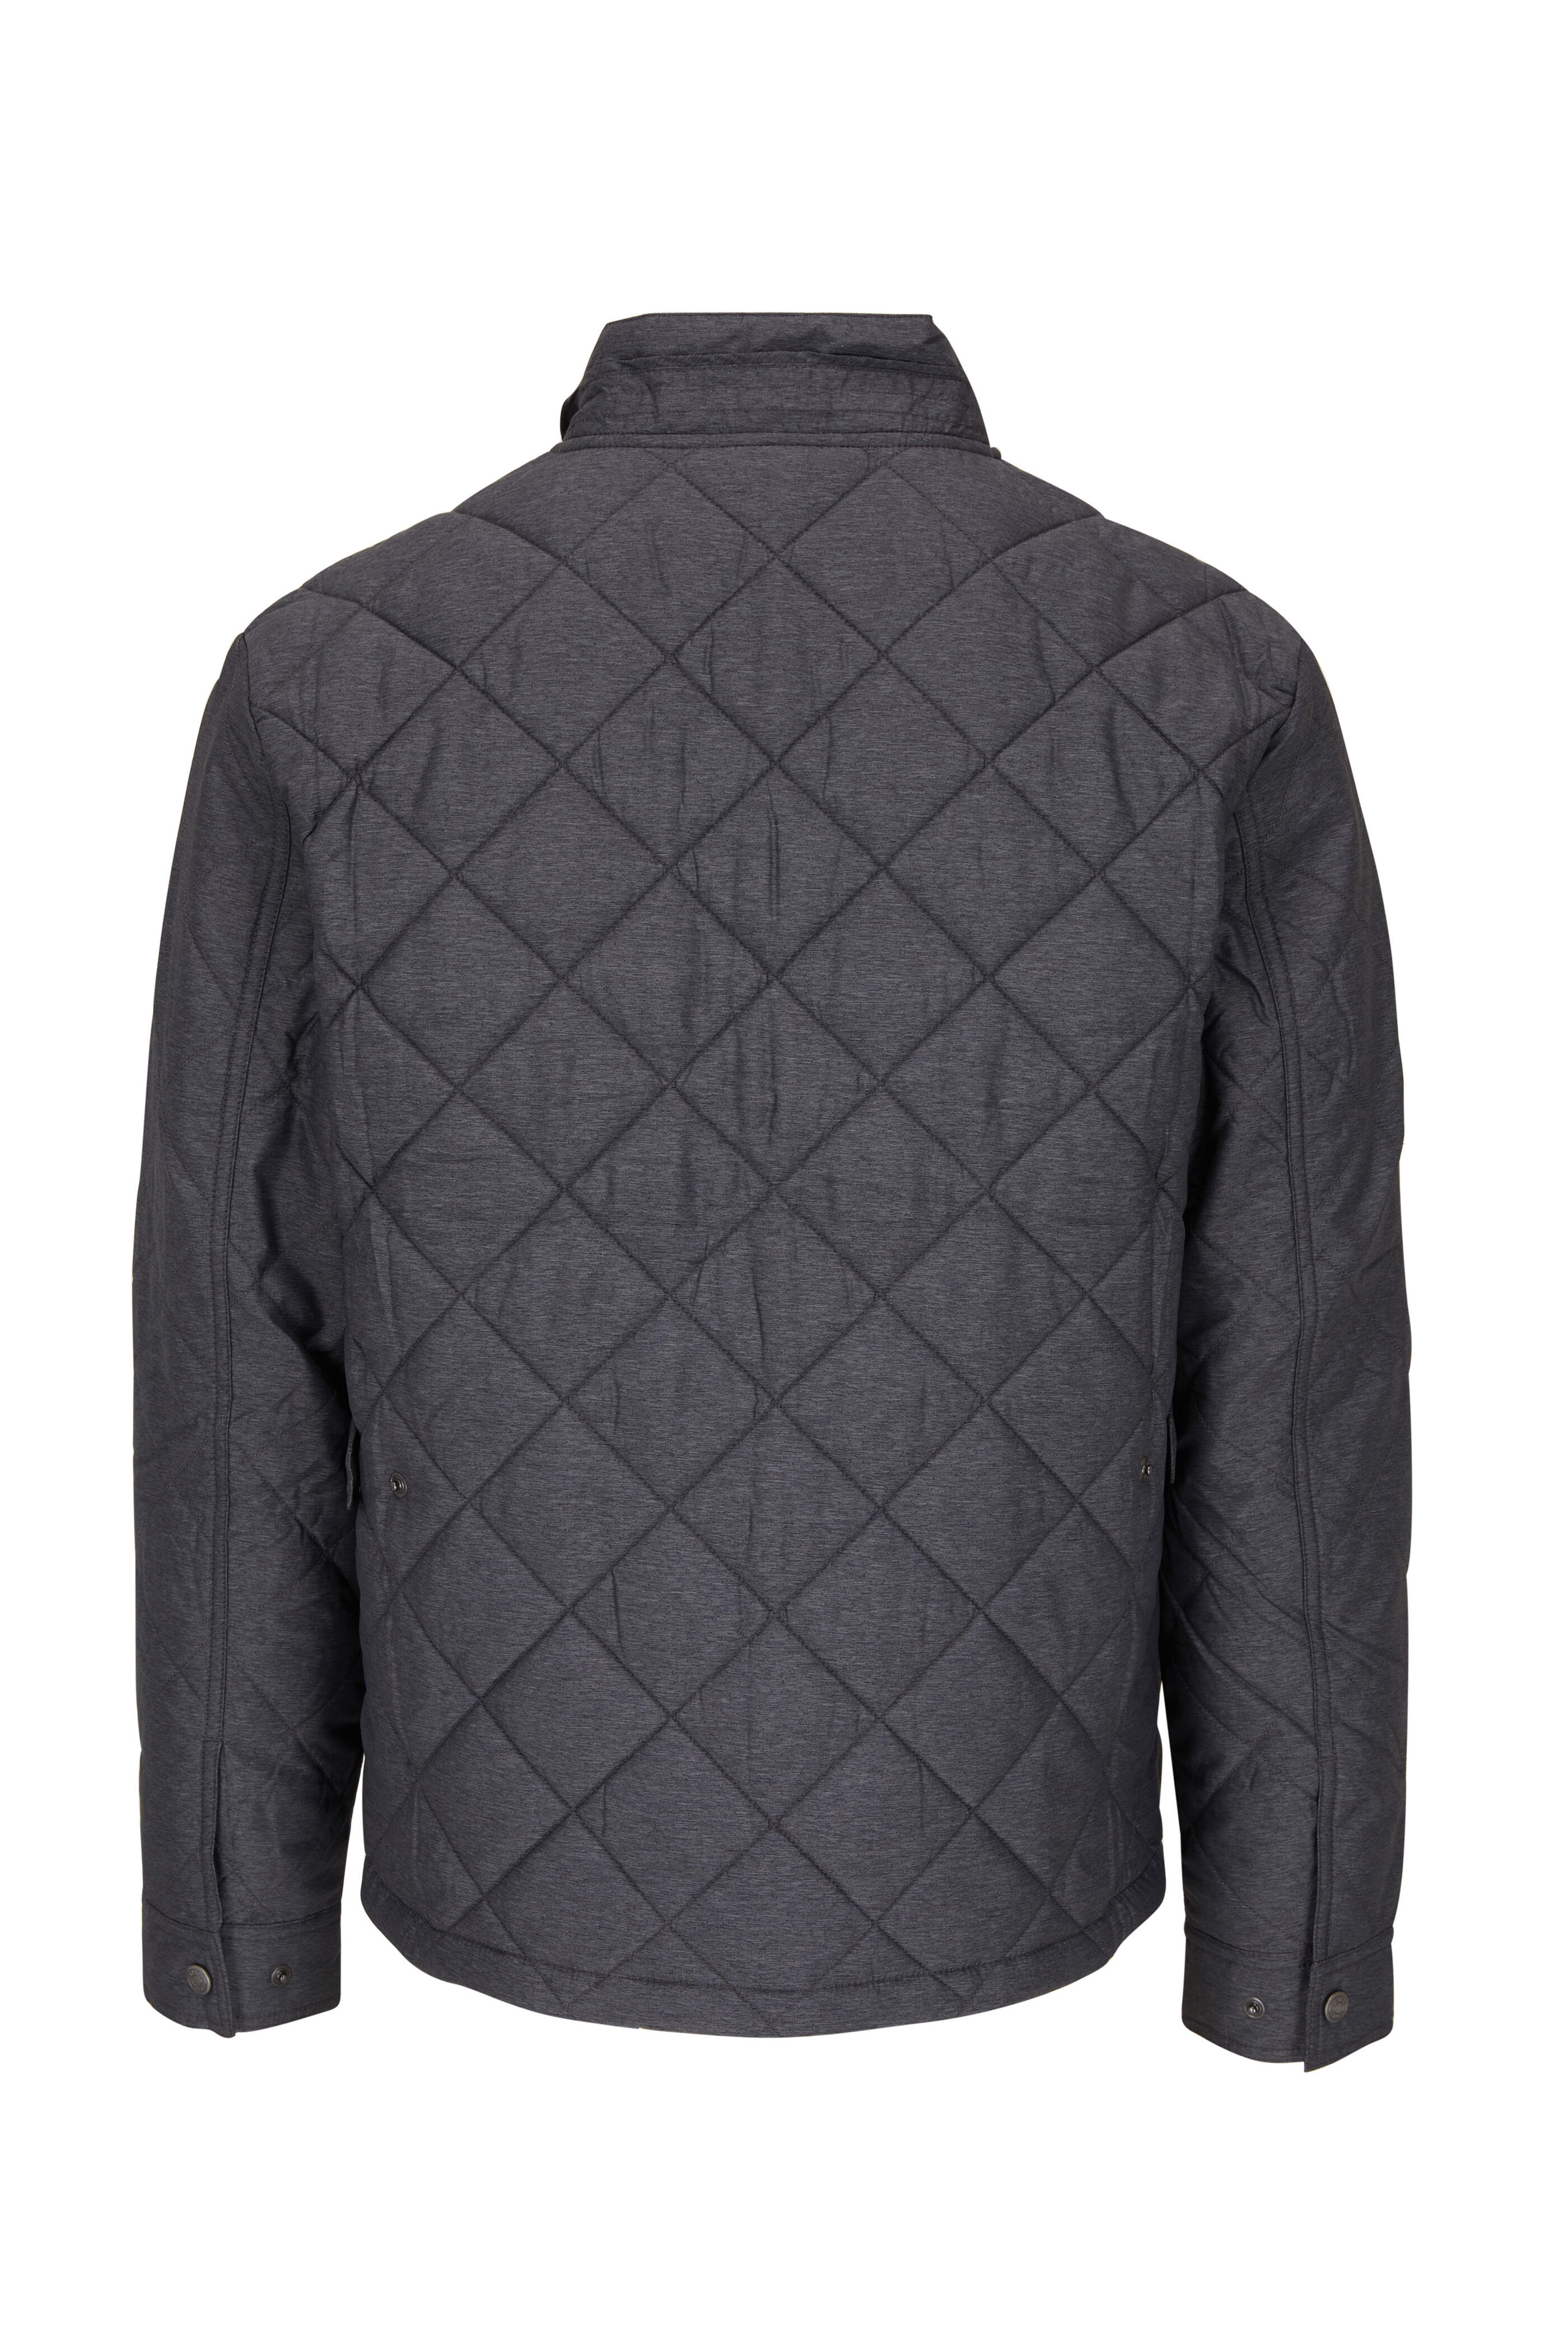 Peter Millar - Norfolk Faded Black Quilted Bomber